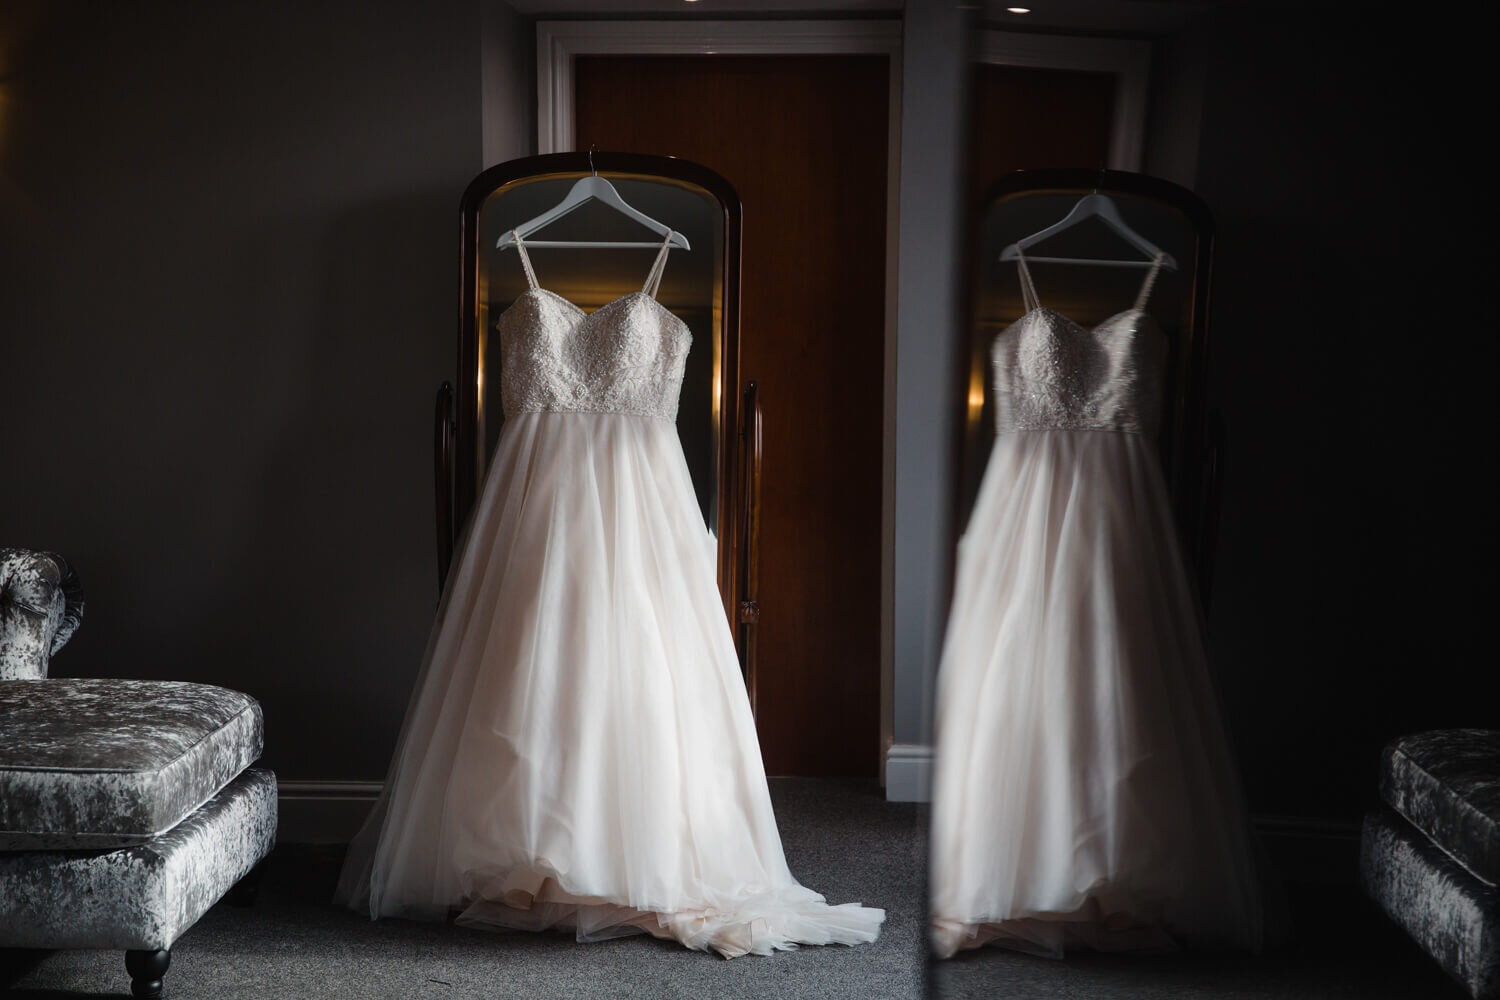 low light exposure photograph of wedding dress in reflection of window